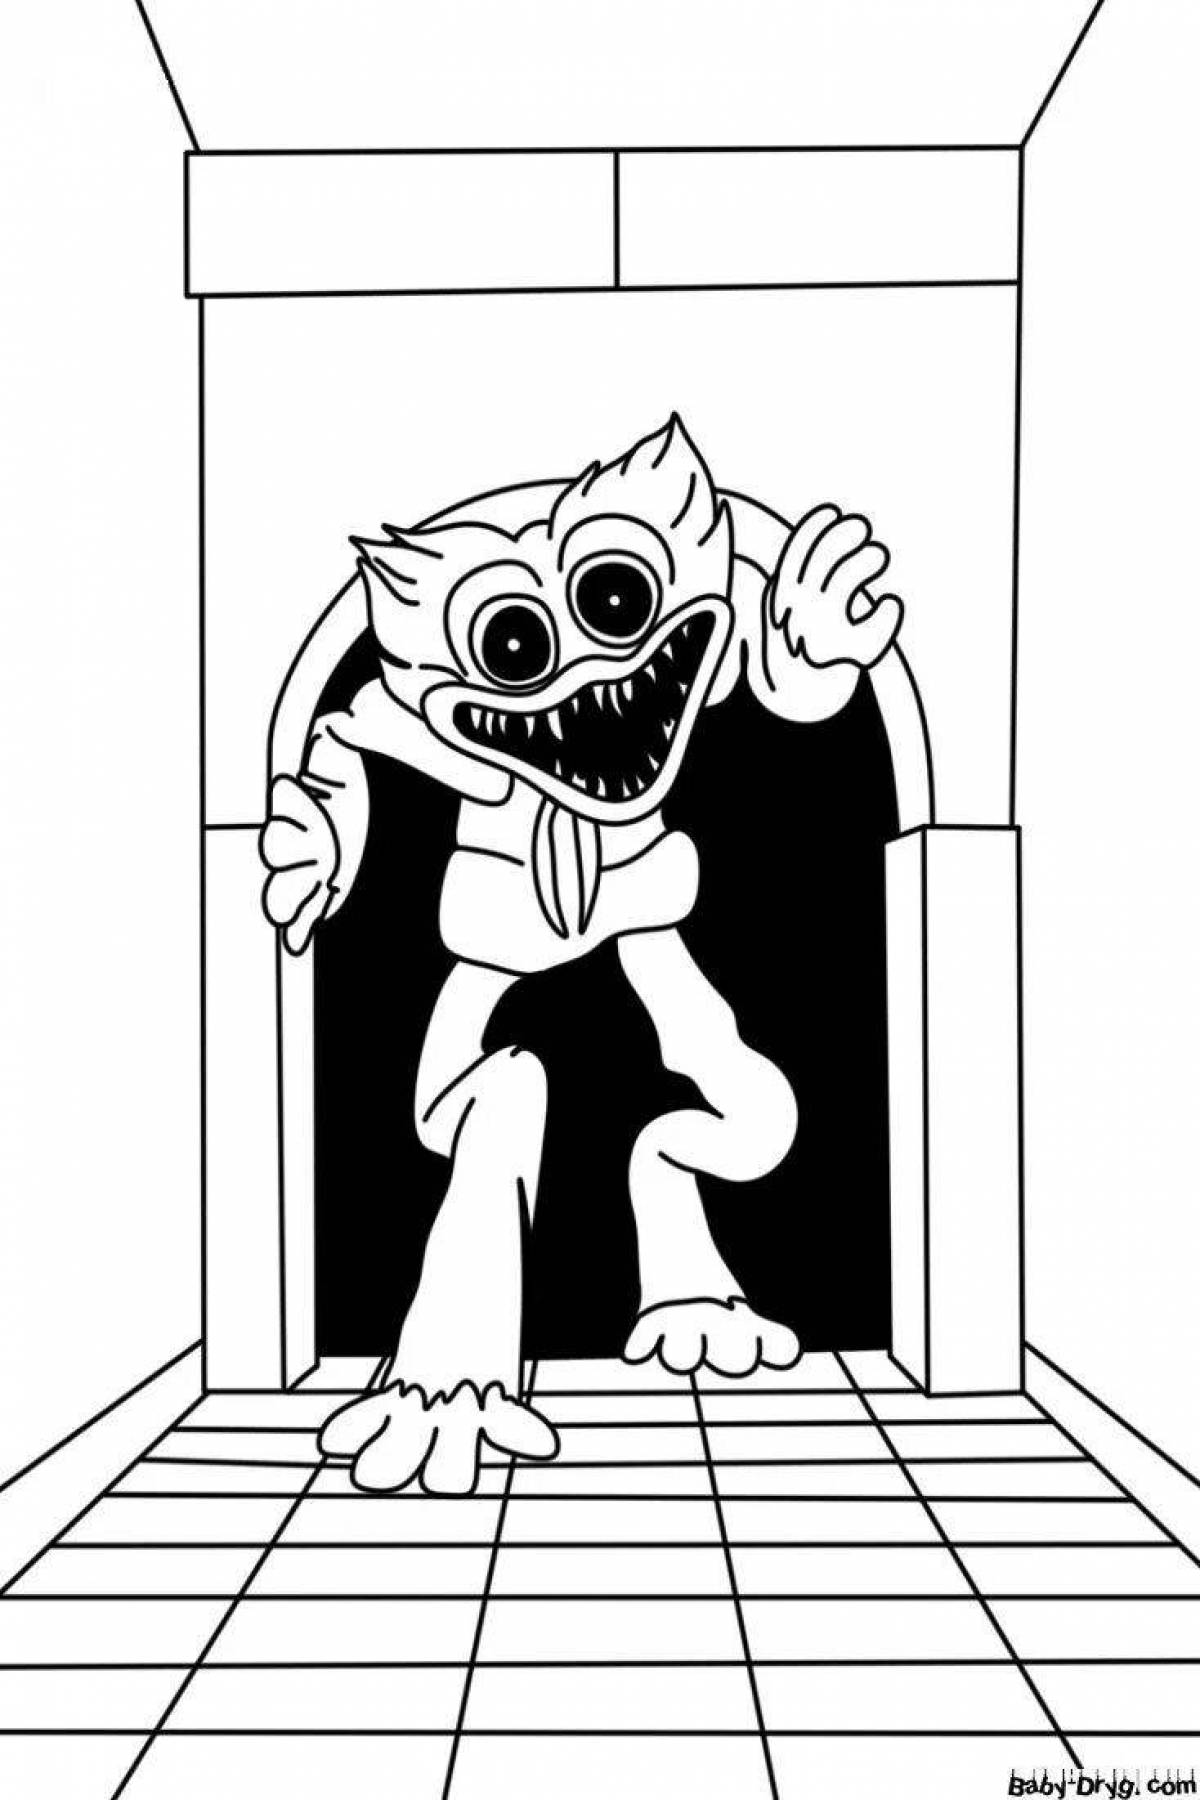 Cute huggies waggie coloring page